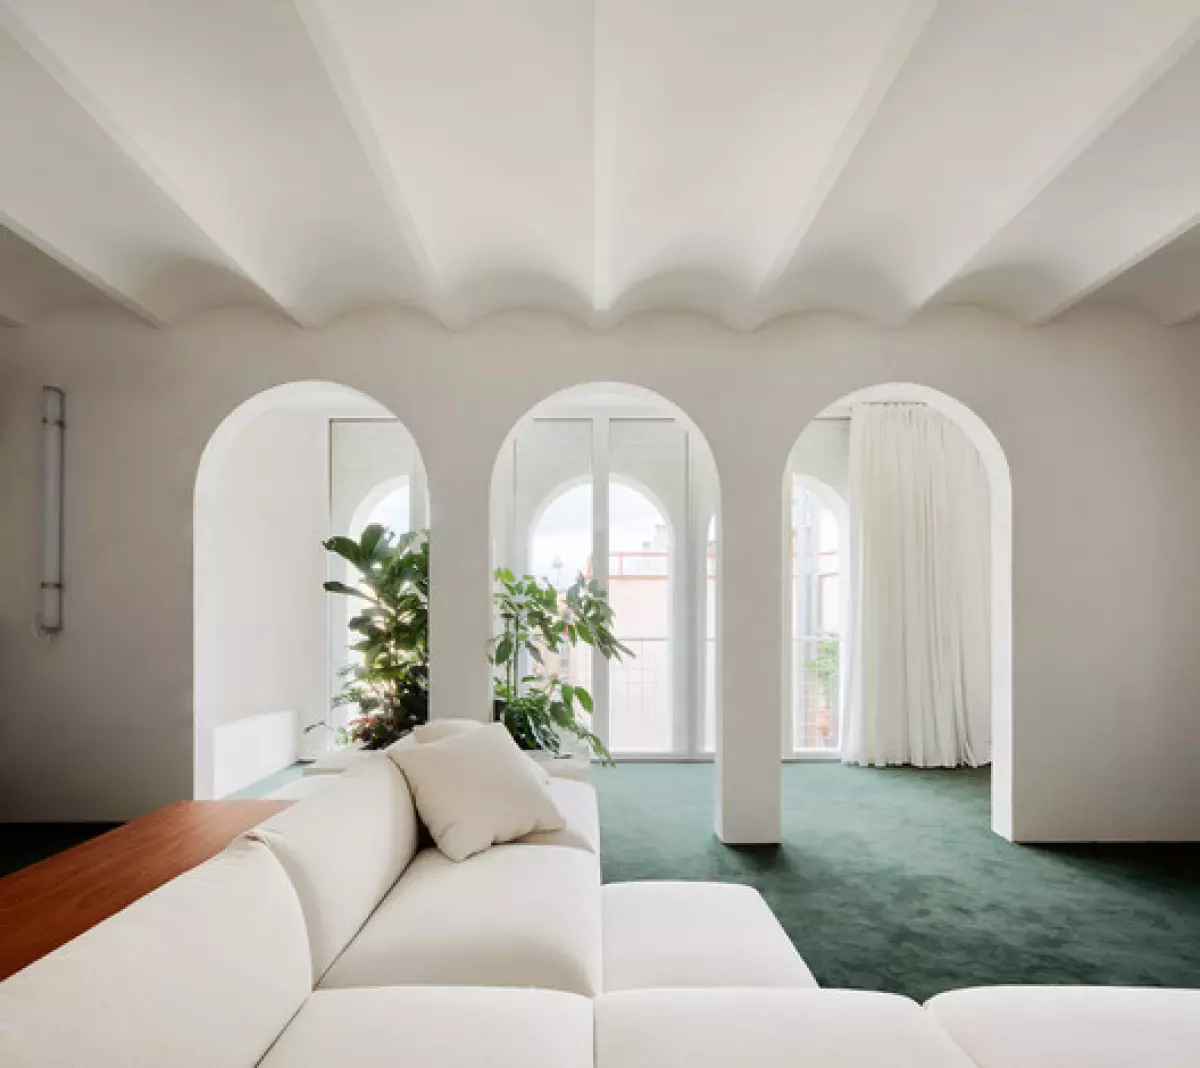 Arches in Interior Design: 26 Projects that Reimagine the Classical Shape - Image 1 of 30